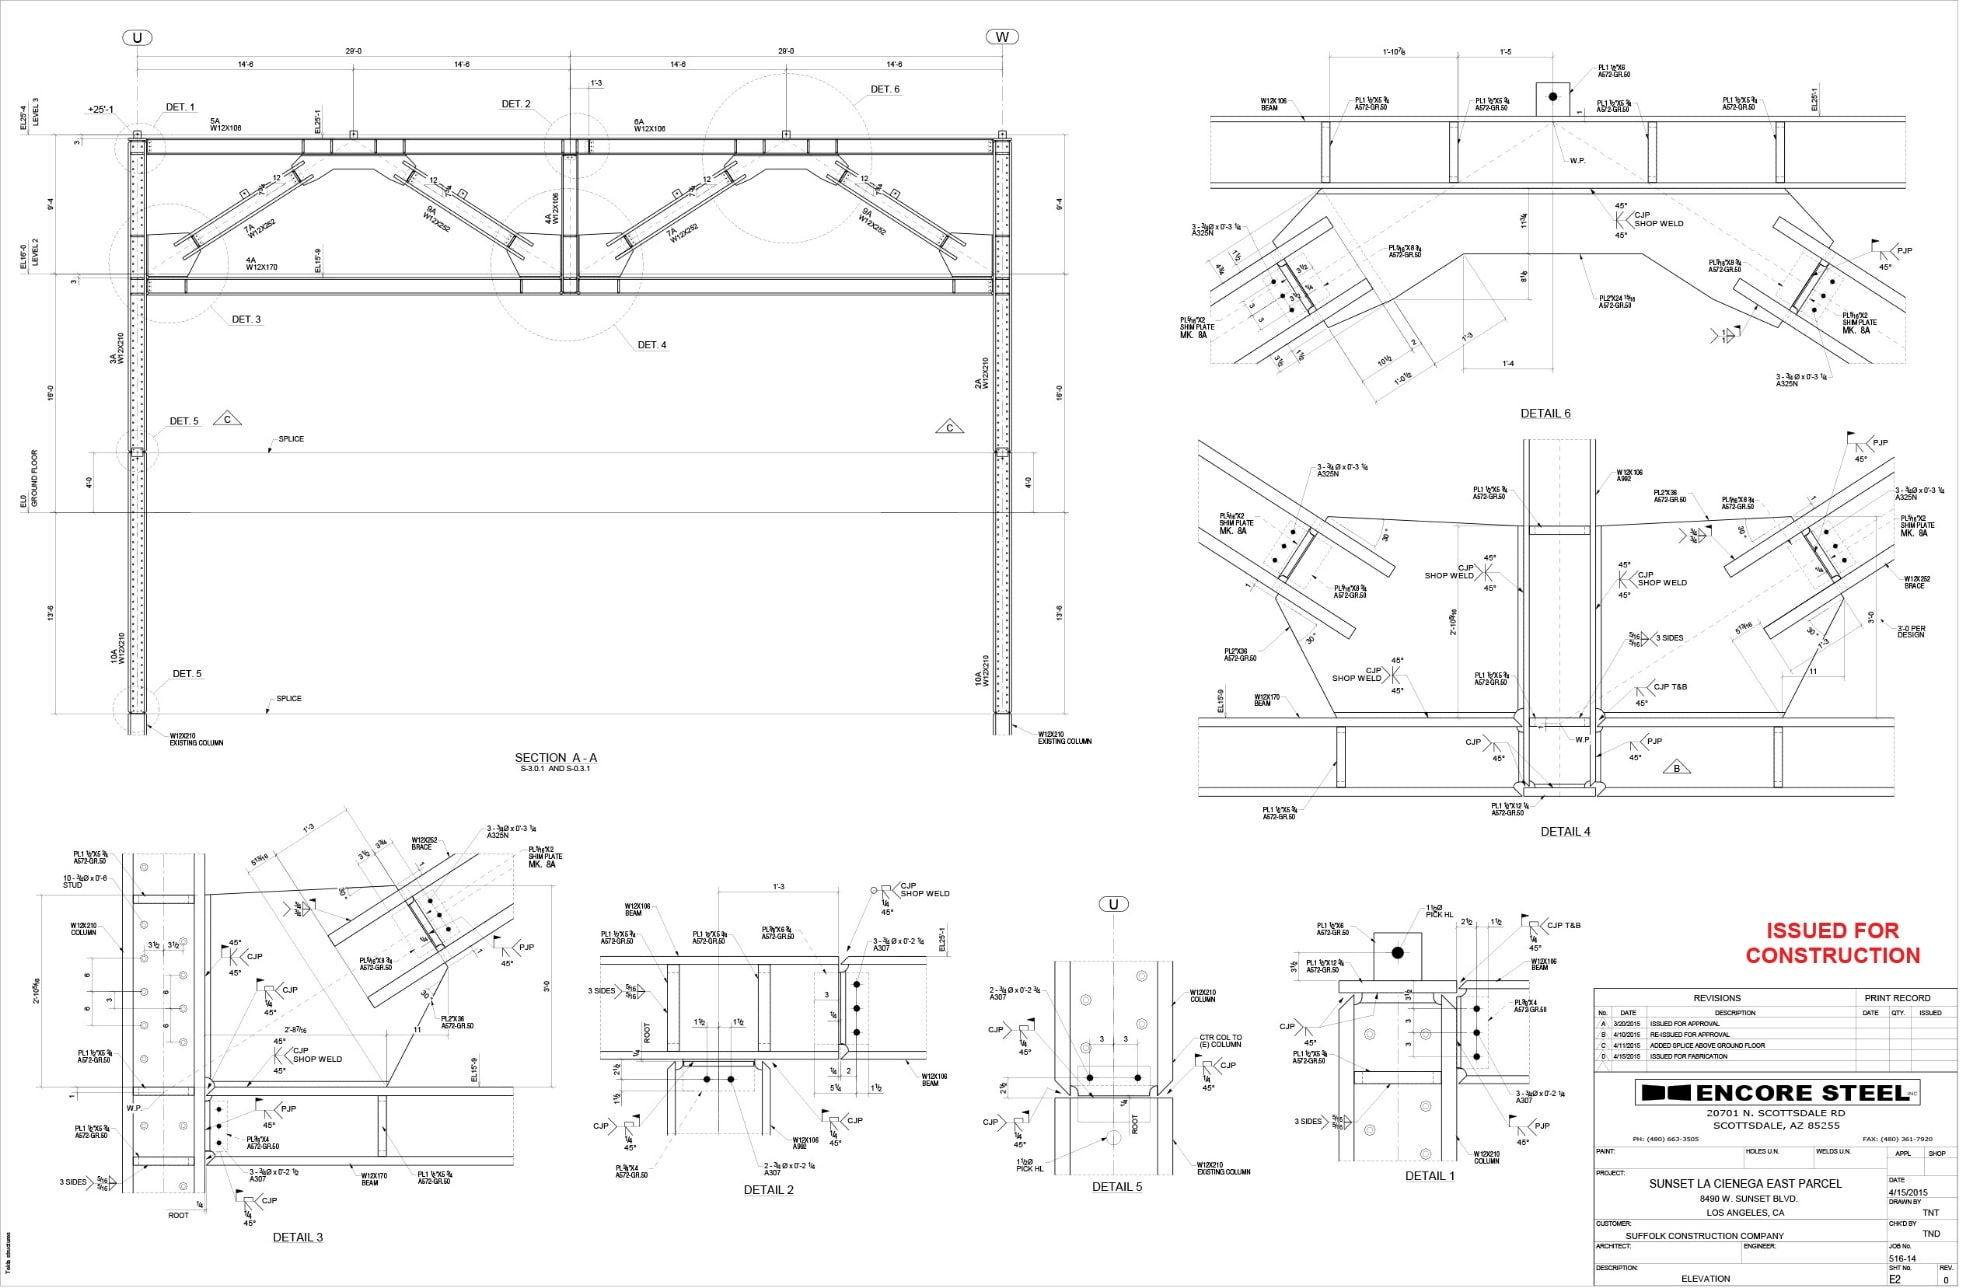 Example of a shop drawing sheet